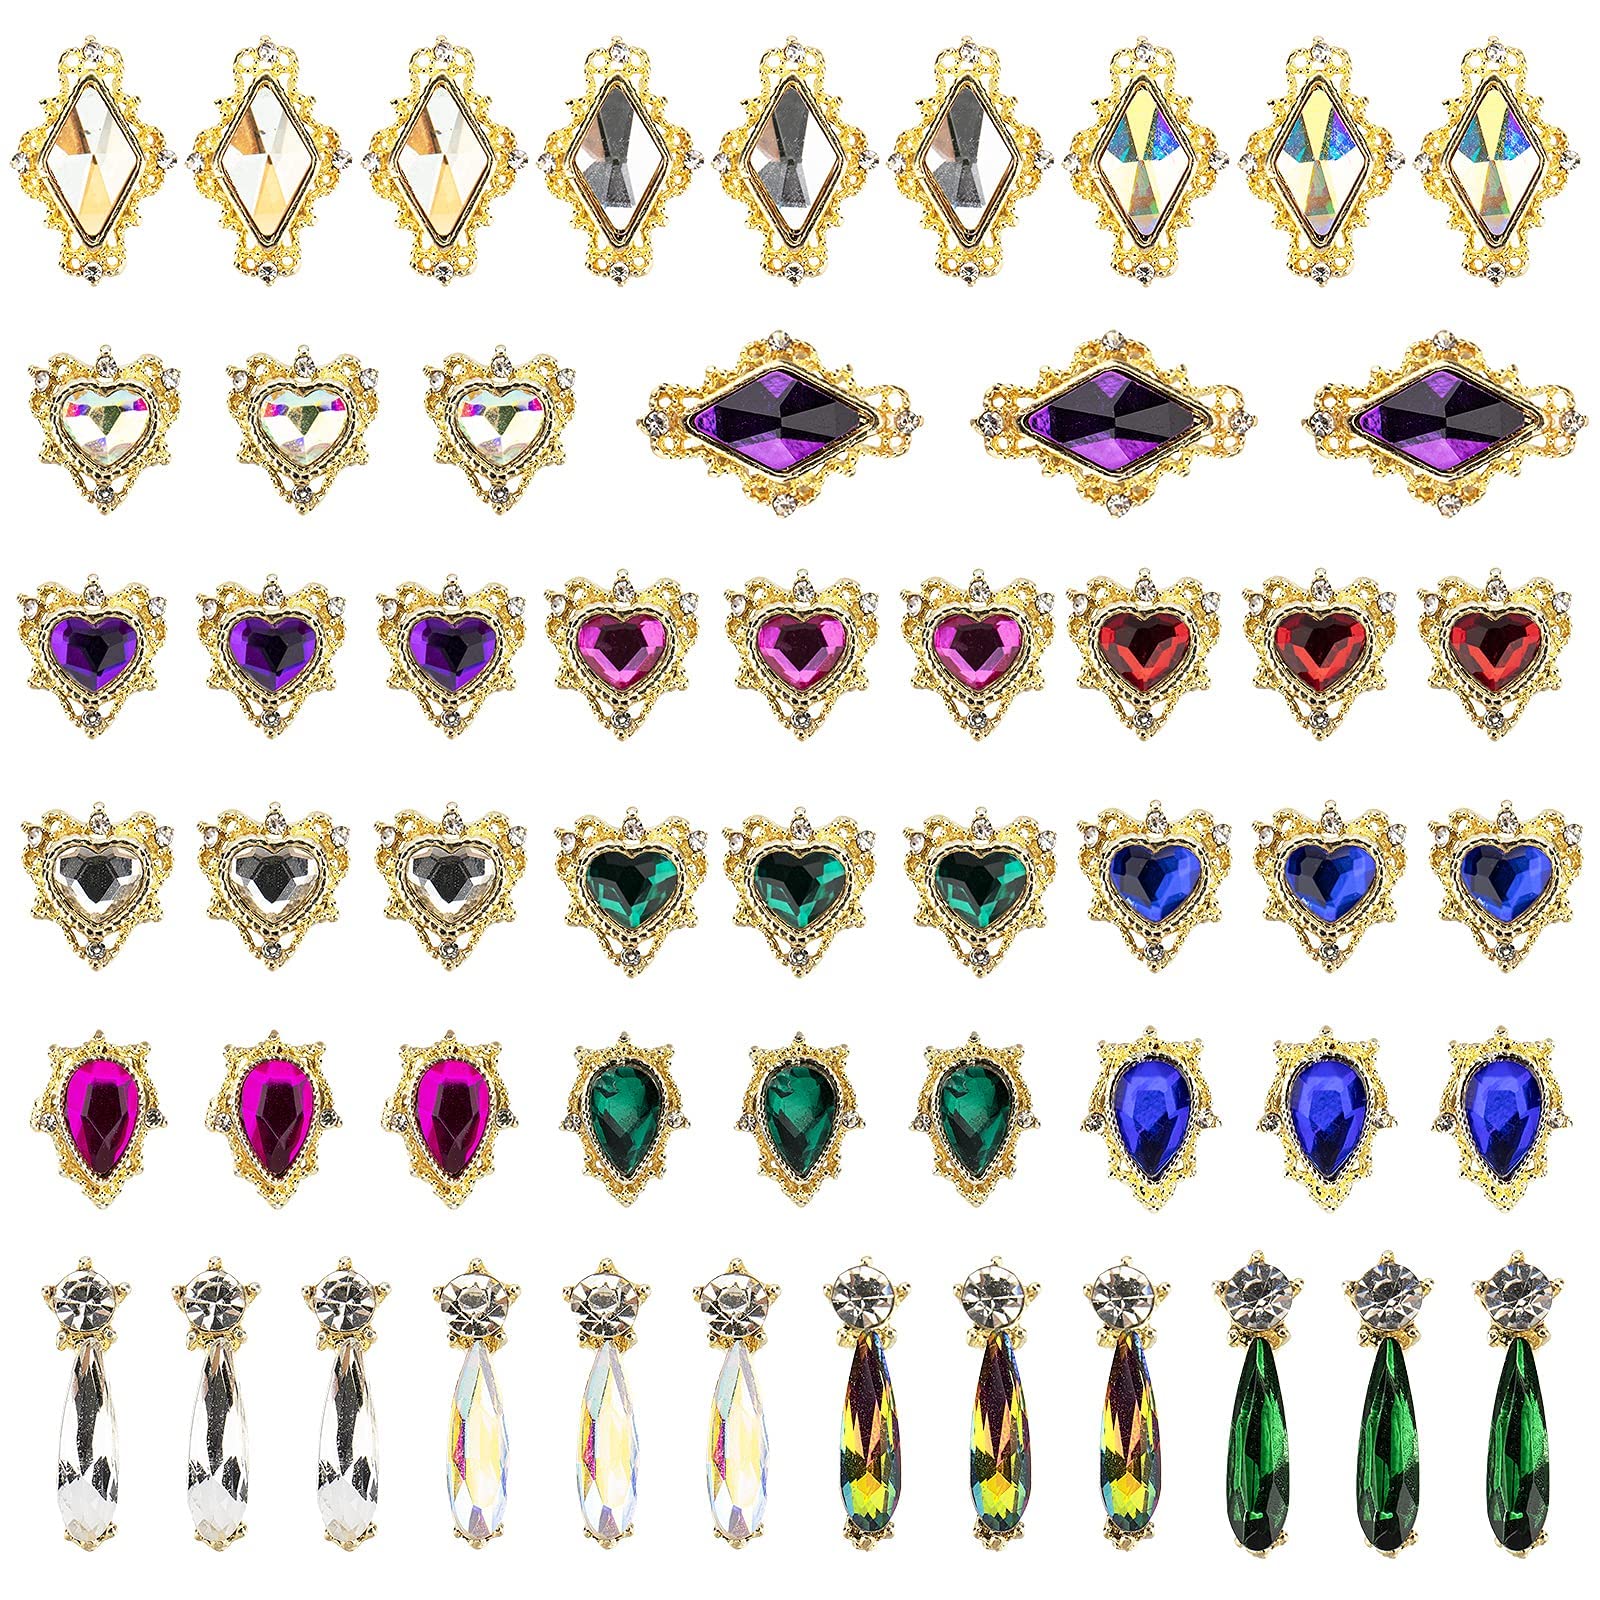 JIEPING 54PCS Nail Art Rhinestones 3D Nail Charms Gems Decorations Big AB  Iridescent Crystal Jewels Gold Chrome Metal Alloy Hearts Drops Charm for  DIY Multiple shapes colorful gem